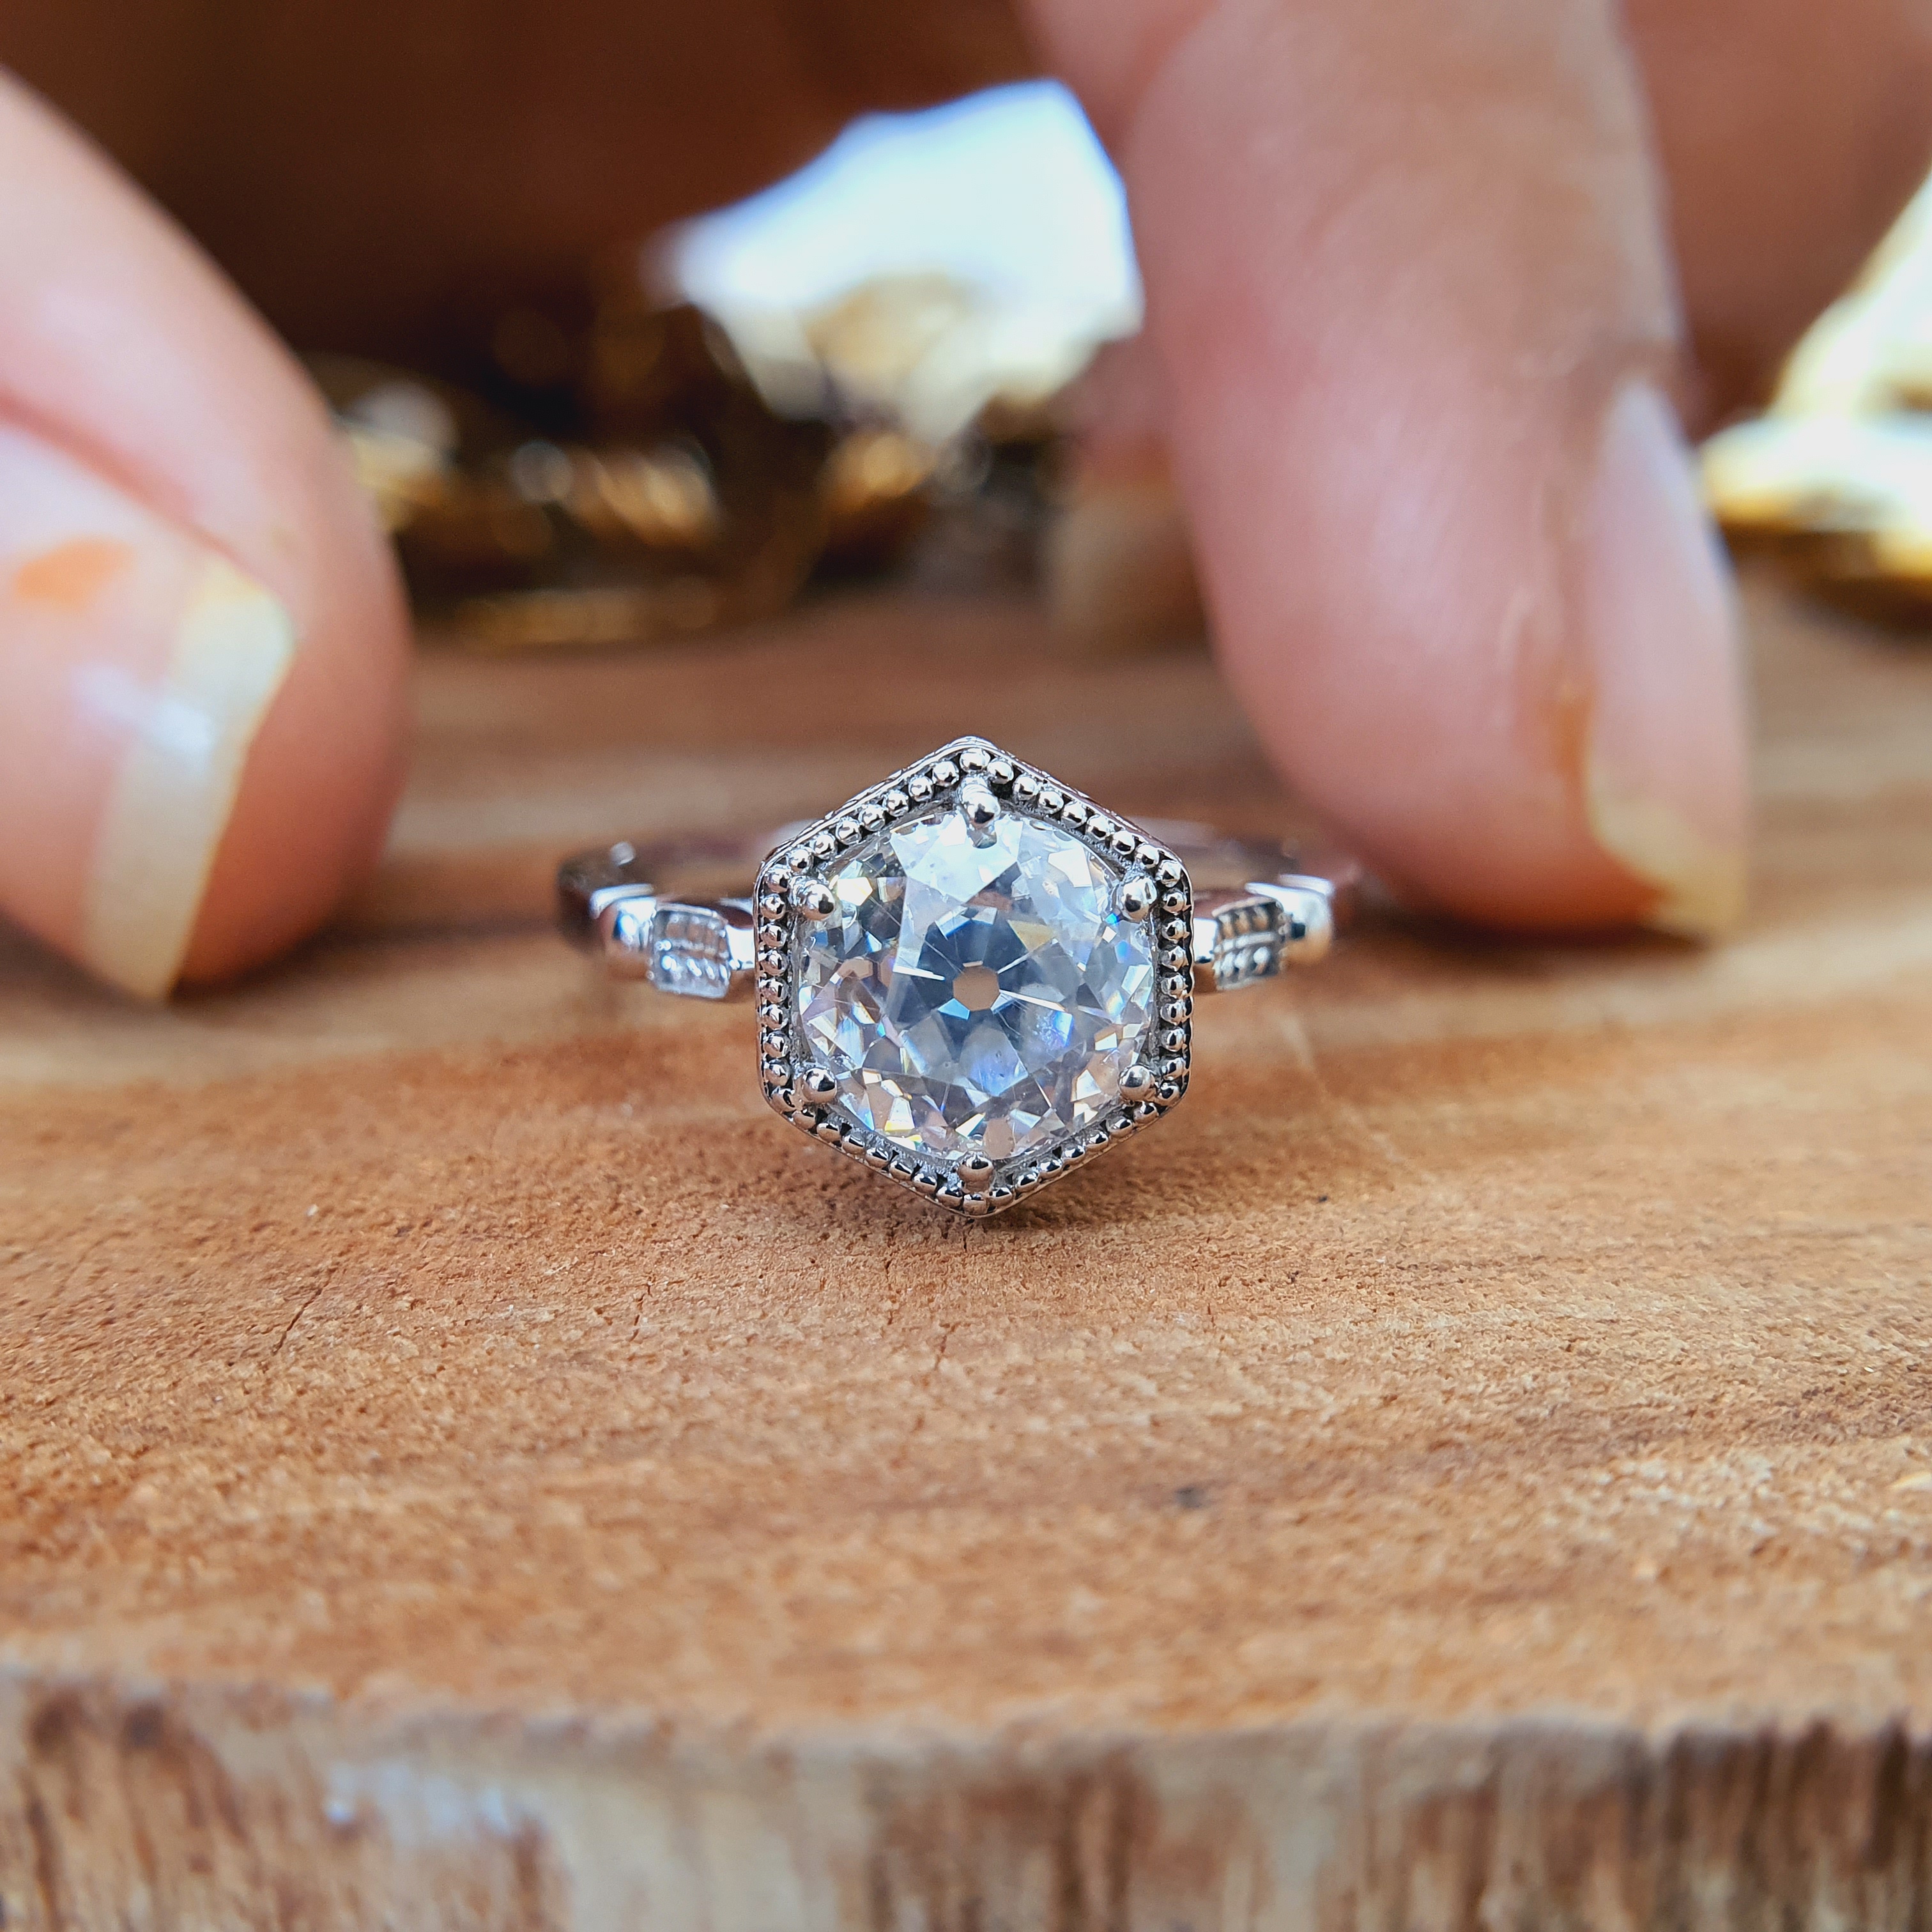 Eurekalook Is Offering More Moissanite And Engagement Ring Choices